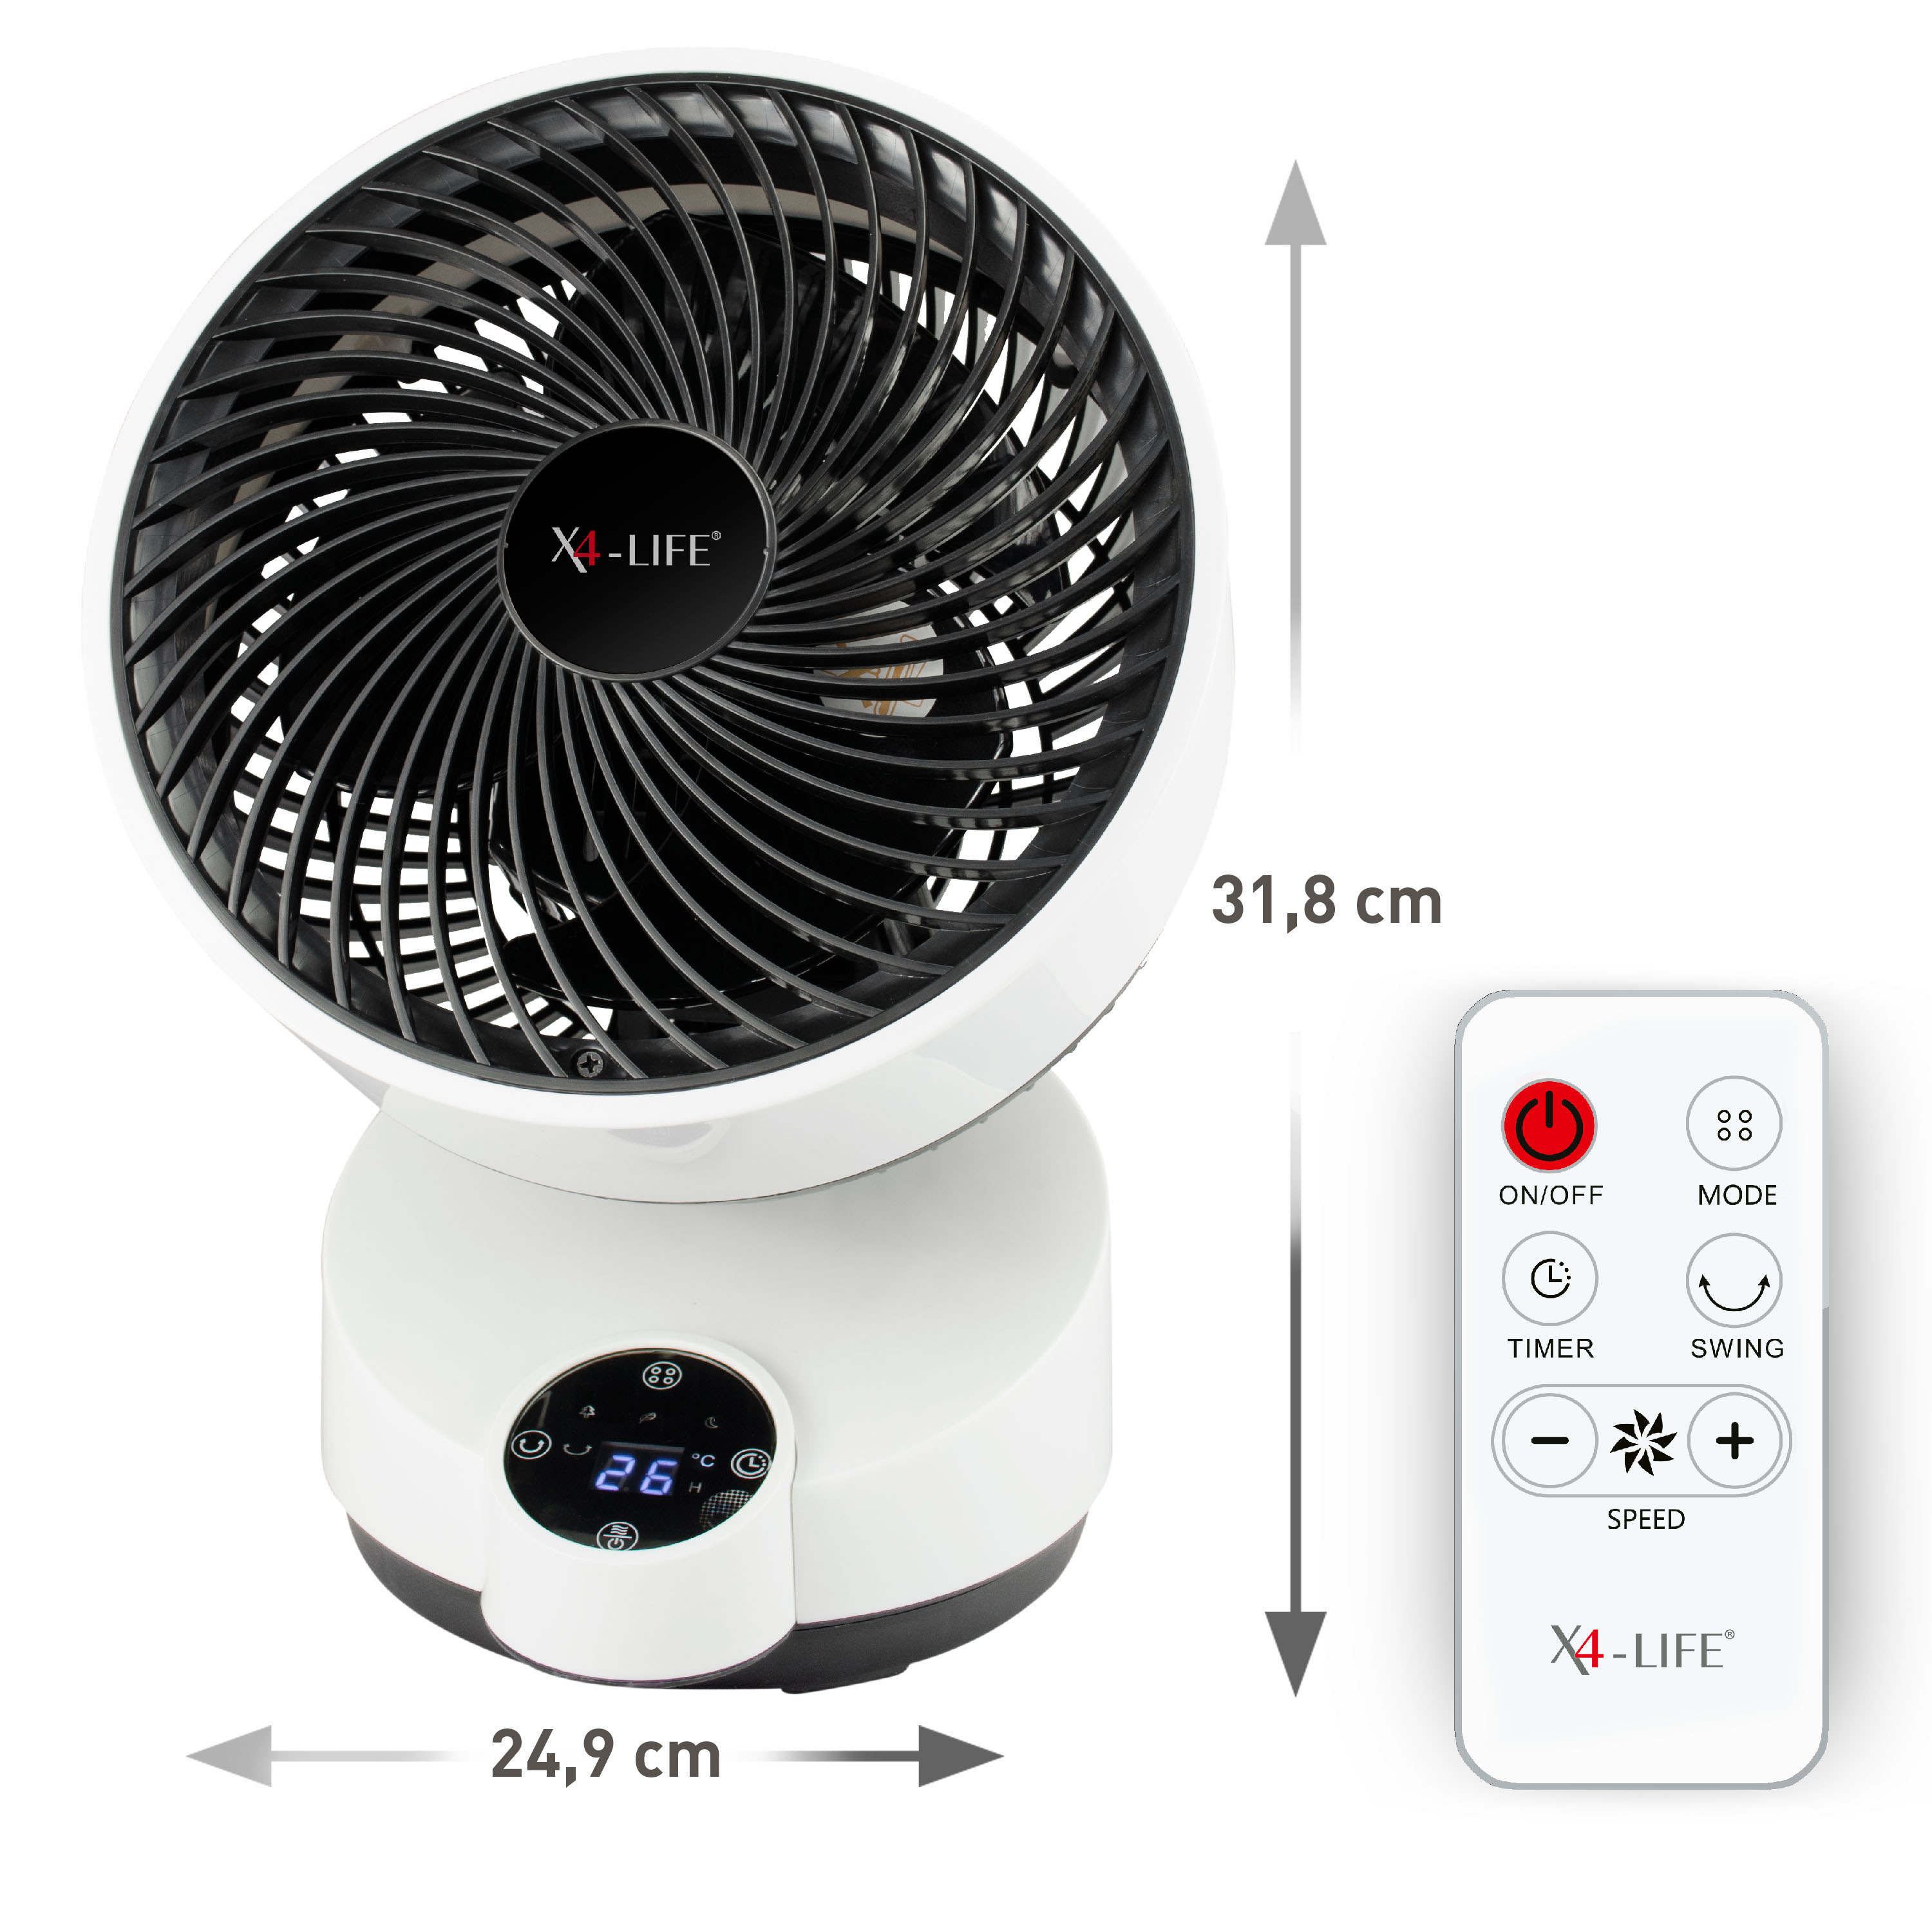 Fan Pinguin DX, a fan with touch control, timer, and remote control, featuring oscillation for wider air distribution, quiet operation, and energy efficiency